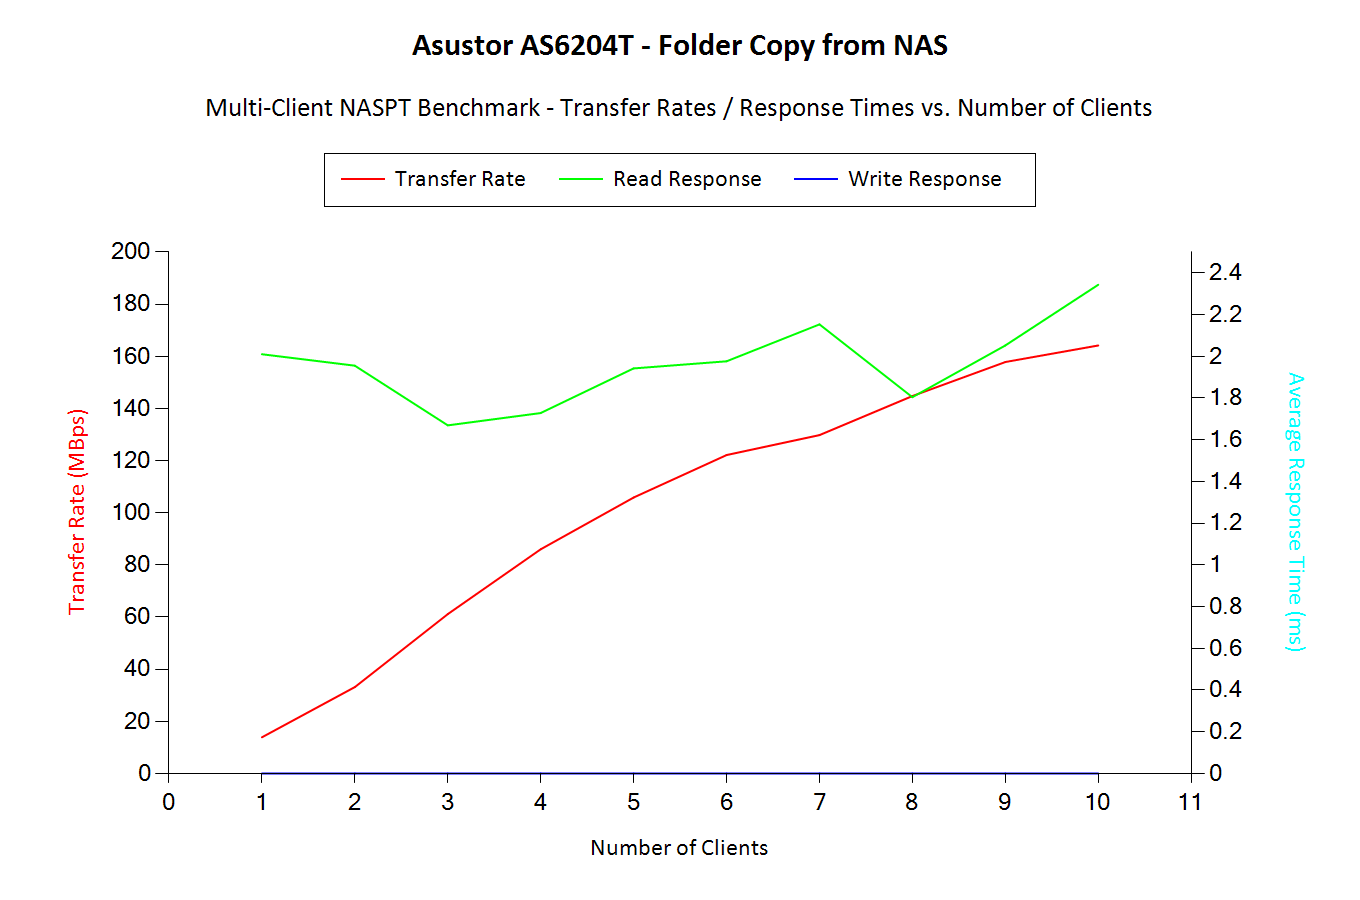 Folder Copy from NAS - Multi-Client Benchmark